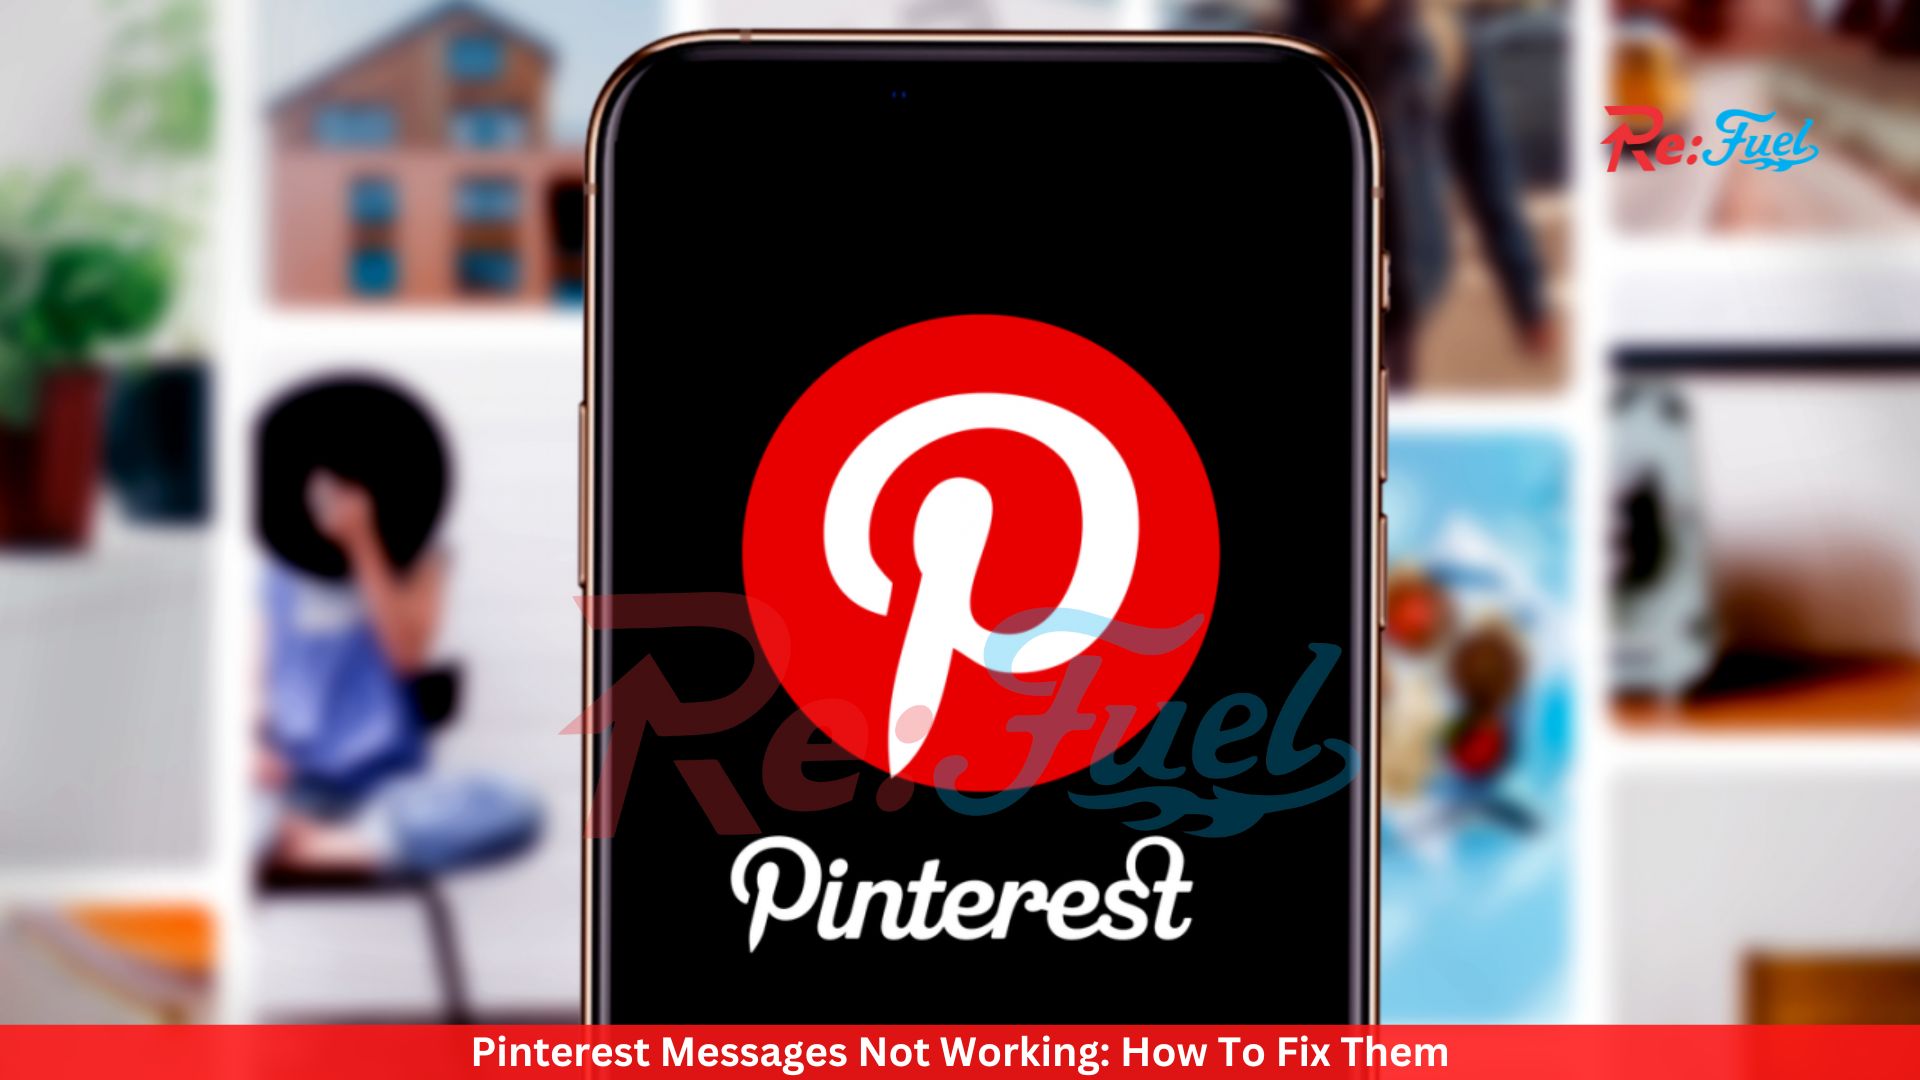 Pinterest Messages Not Working: How To Fix Them